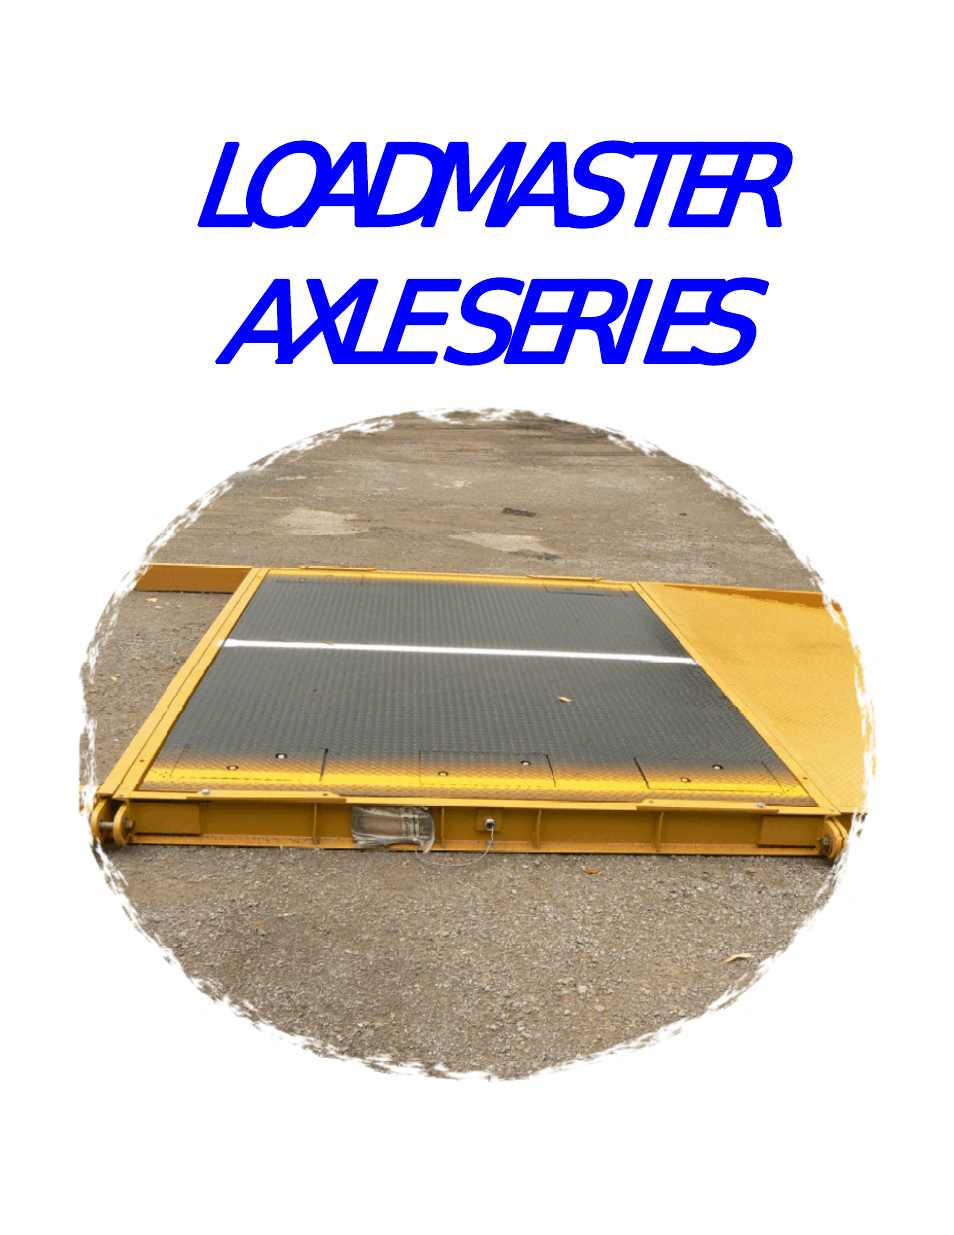 Portable Axle Scale 10'x10' w/ramps